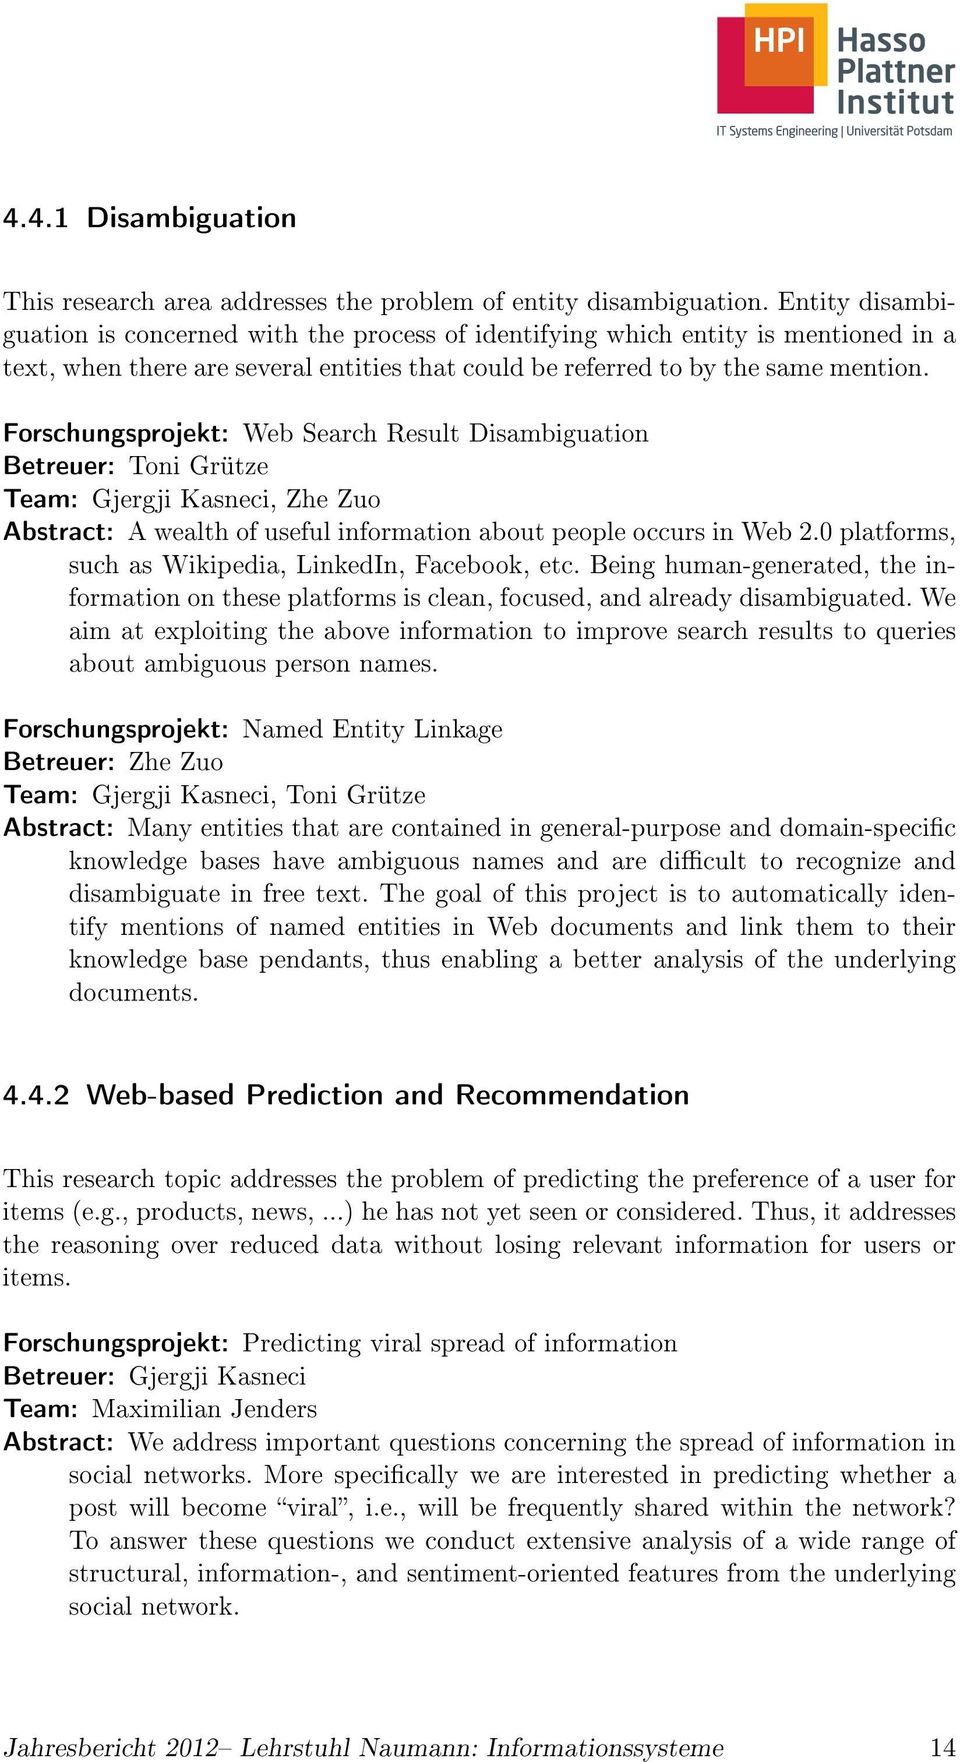 Forschungsprojekt: Web Search Result Disambiguation Betreuer: Toni Grütze Team: Gjergji Kasneci, Zhe Zuo Abstract: A wealth of useful information about people occurs in Web 2.